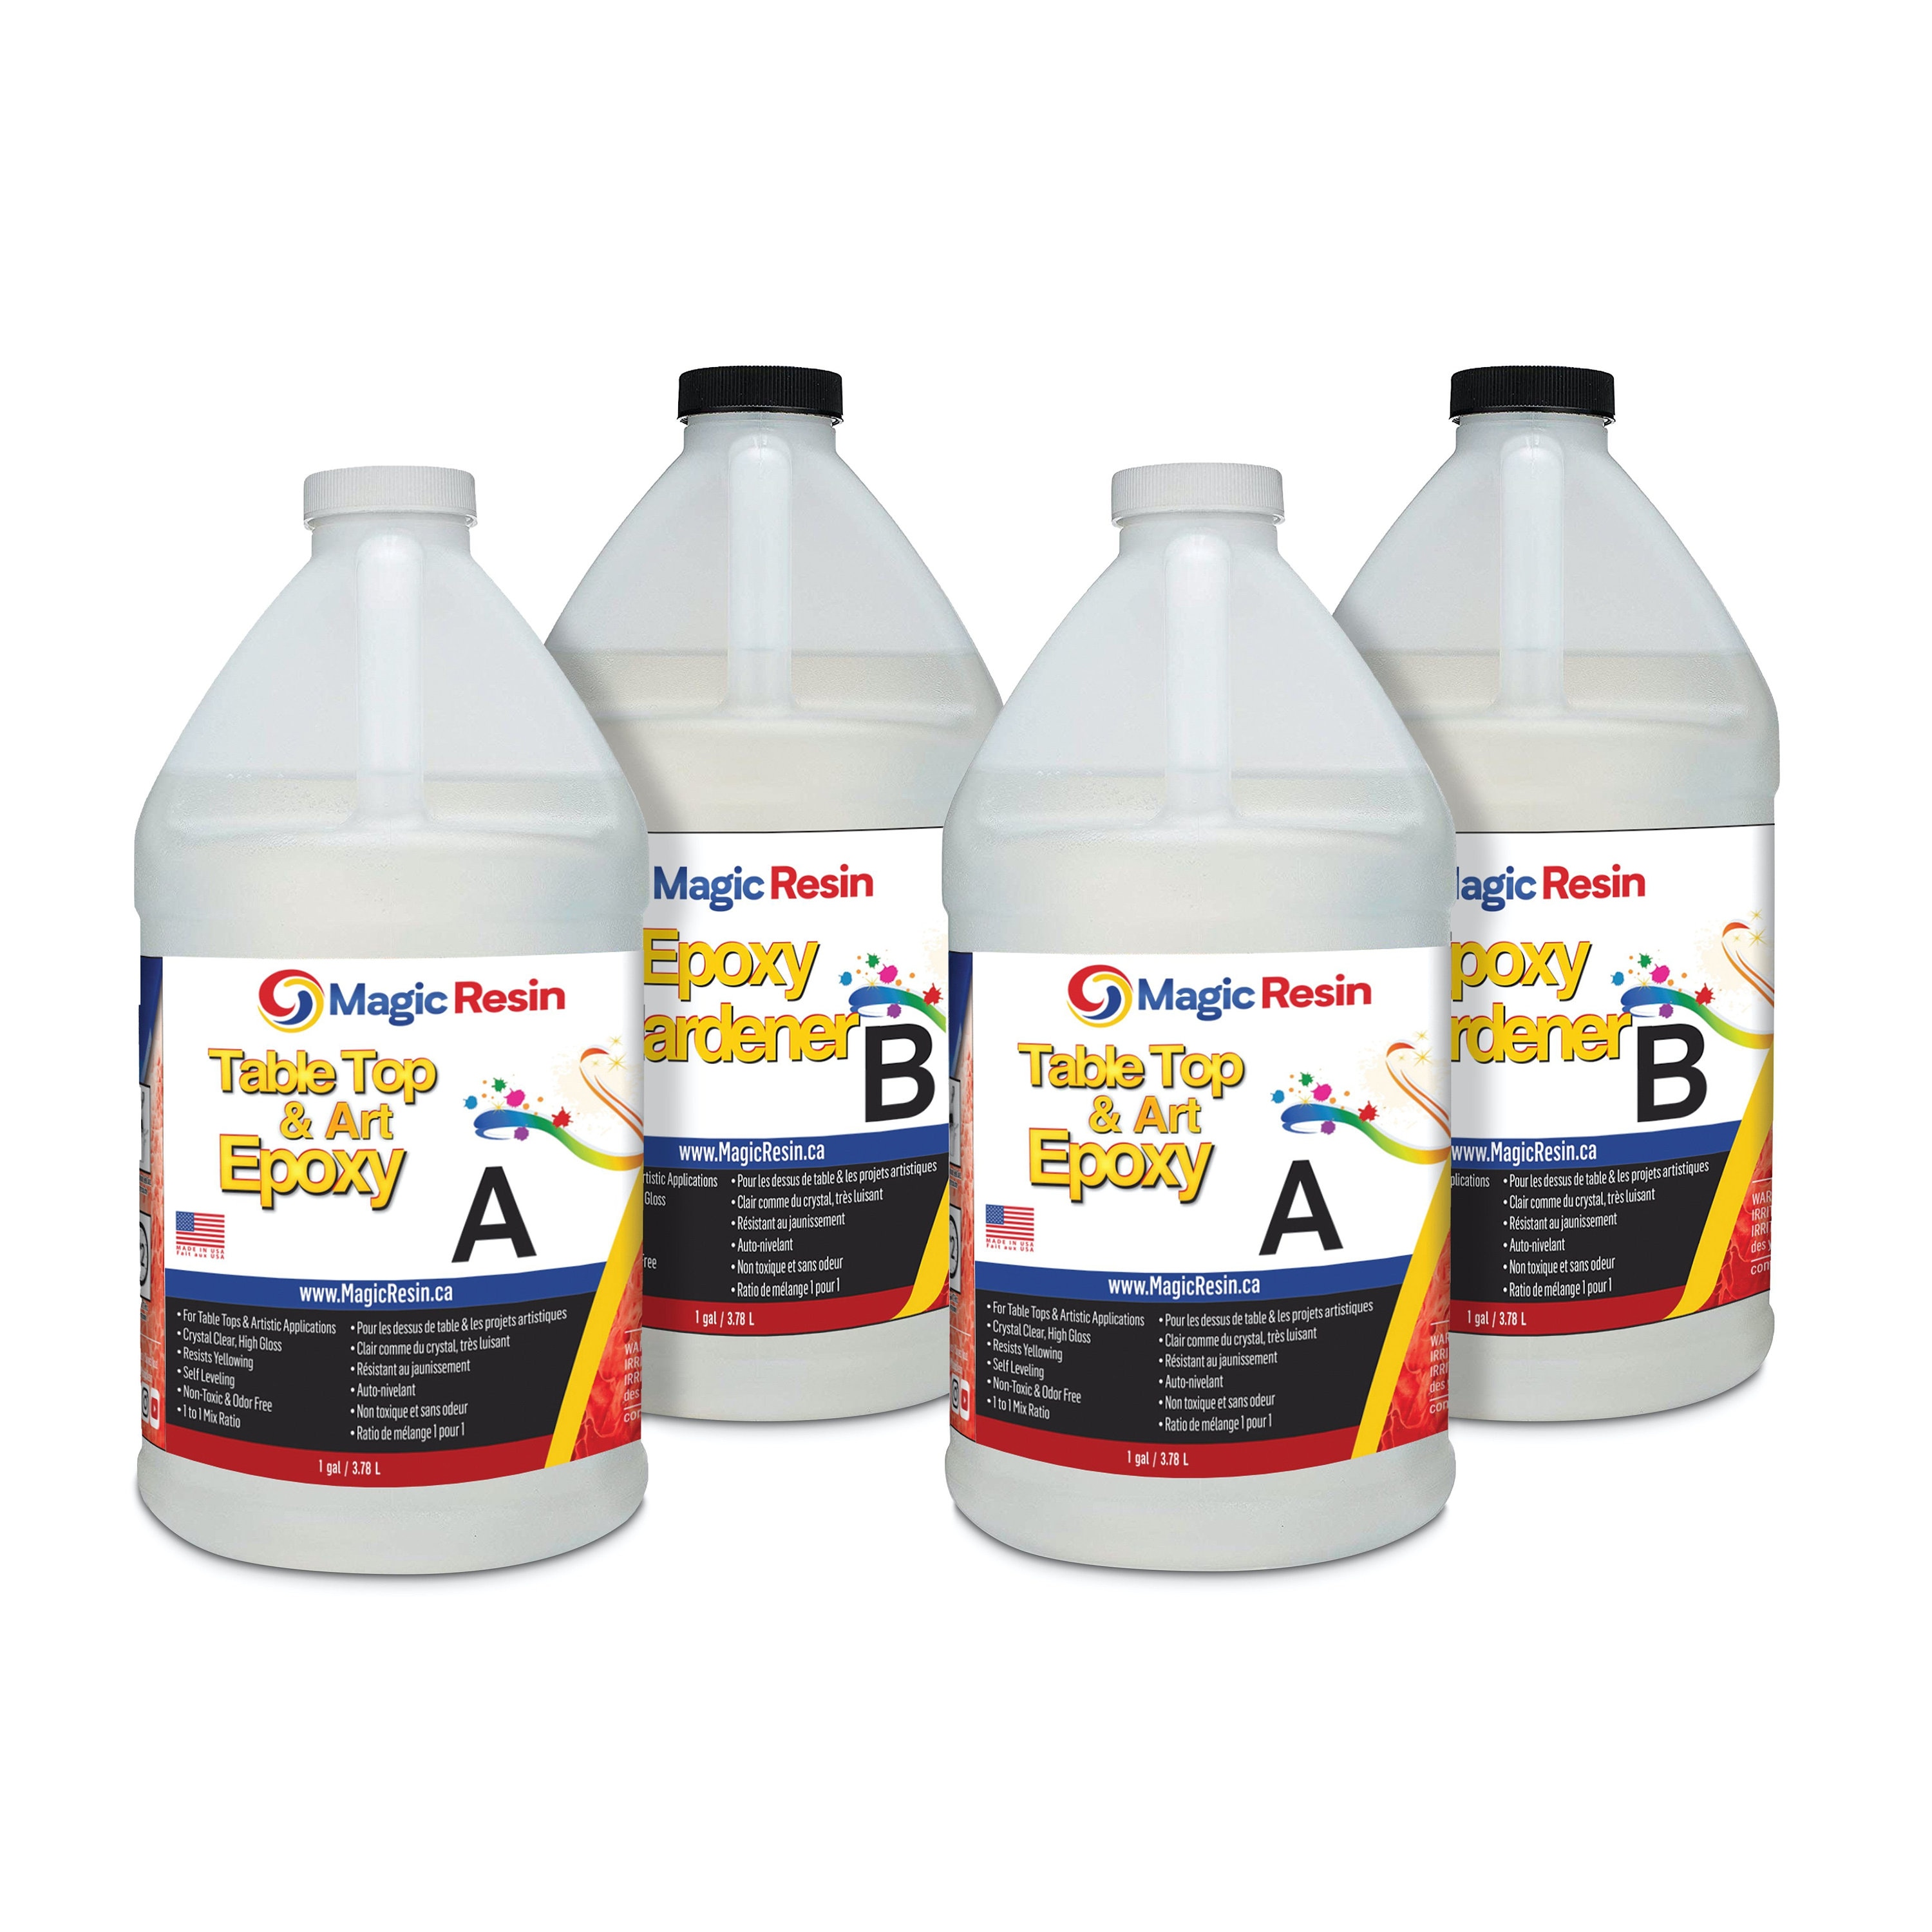 16 Oz (473 ml) | Art & Craft Epoxy Resin Kit | Includes 2 pairs of gloves,  2 cups, 4 sticks & 5 x 5g mica powder bags | Free express shipping